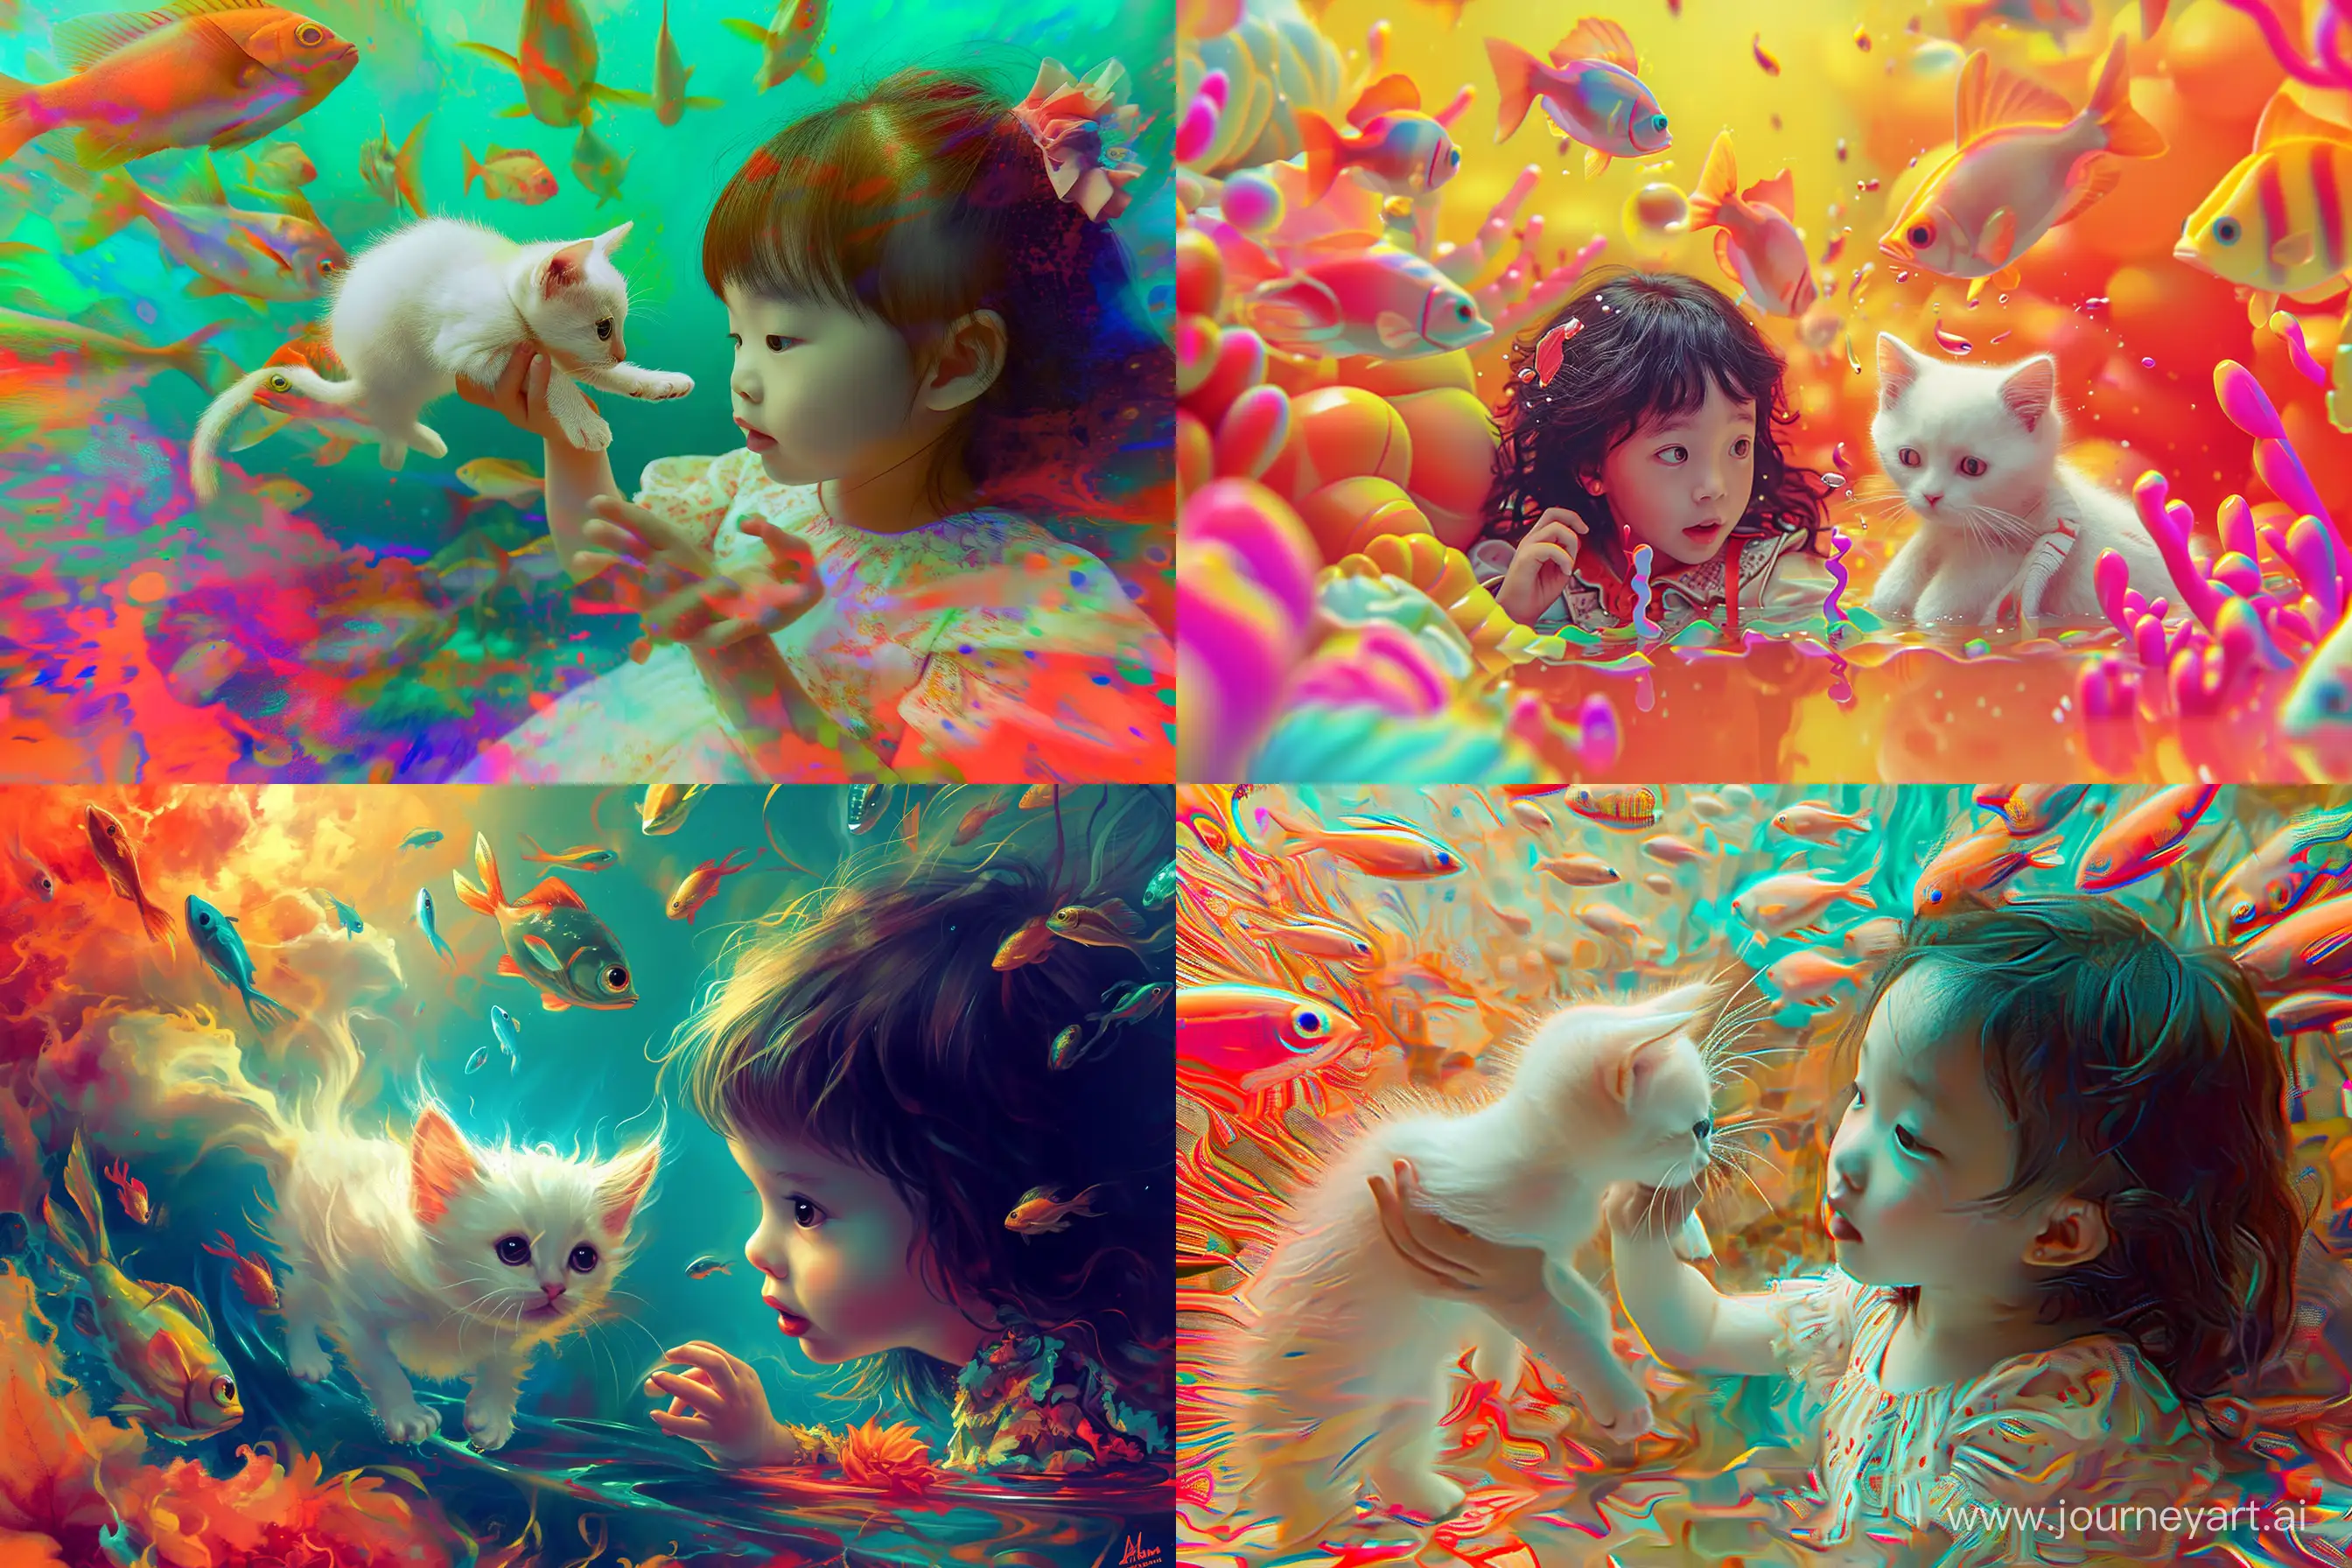 Whimsical-Scene-of-a-Girl-with-a-White-Cat-Surrounded-by-Floating-Fishes-in-a-Pop-Surrealism-World